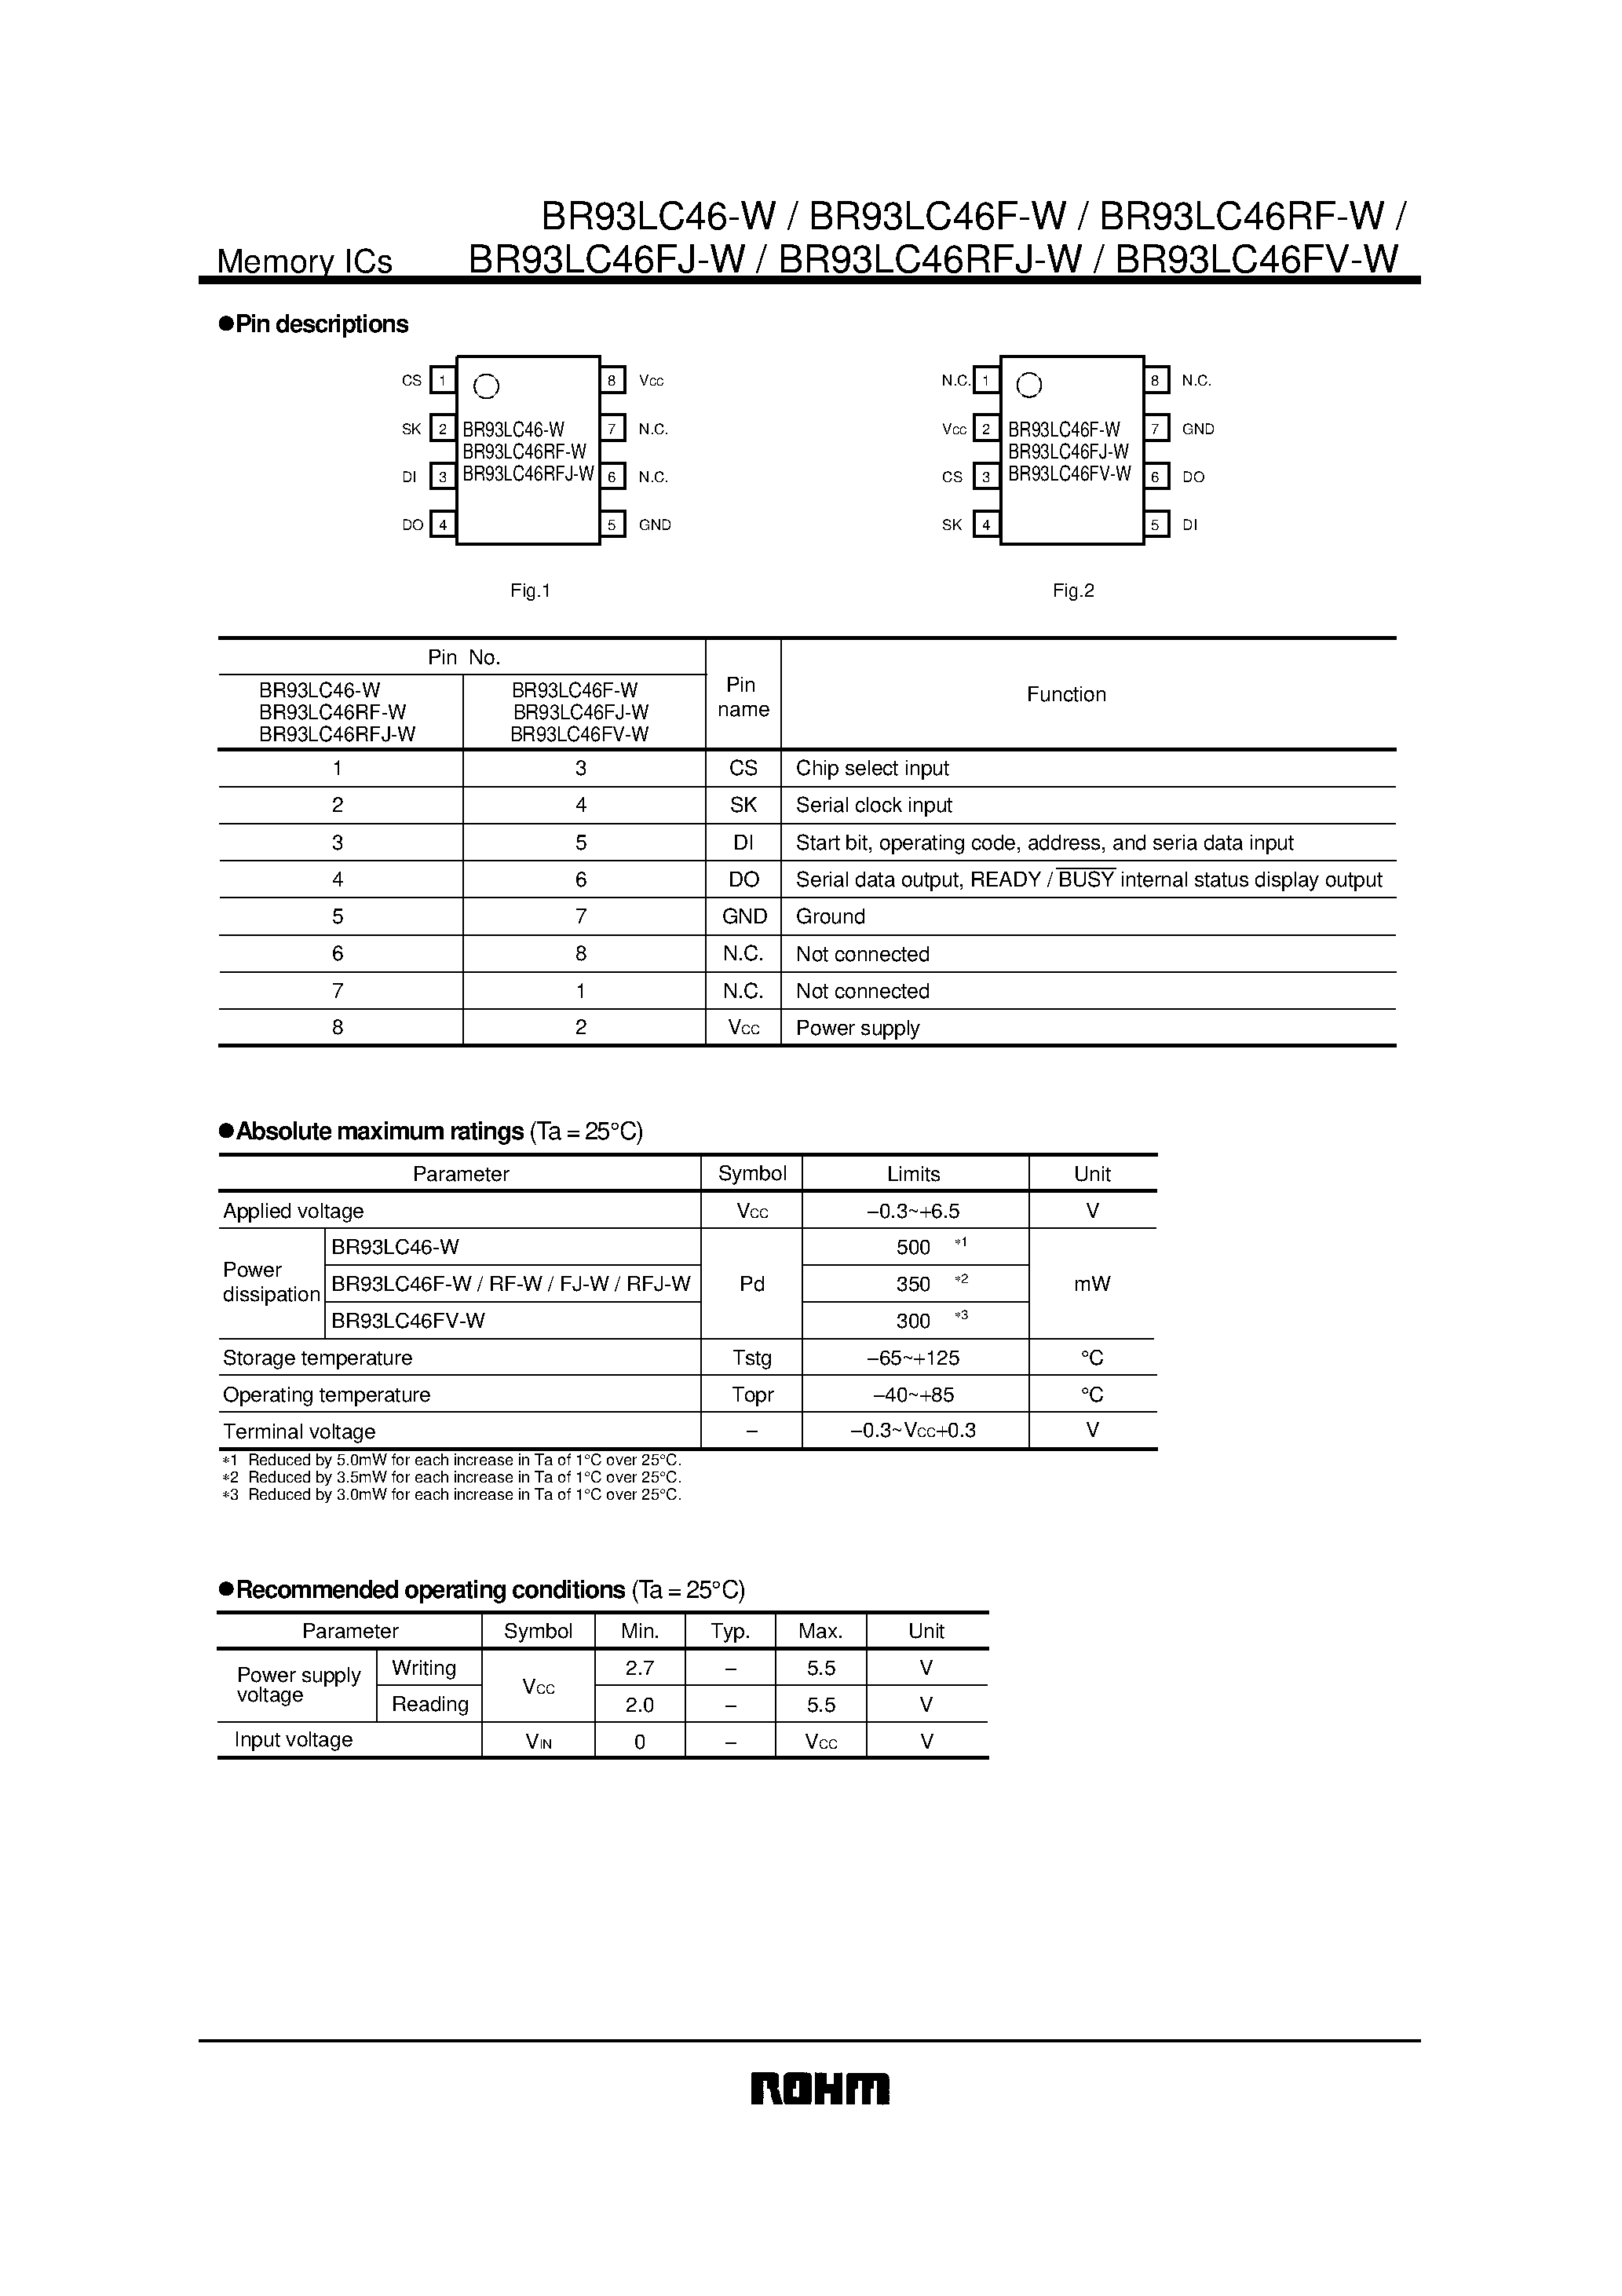 Datasheet BR93LC46-W - 6416bits serial EEPROM page 2